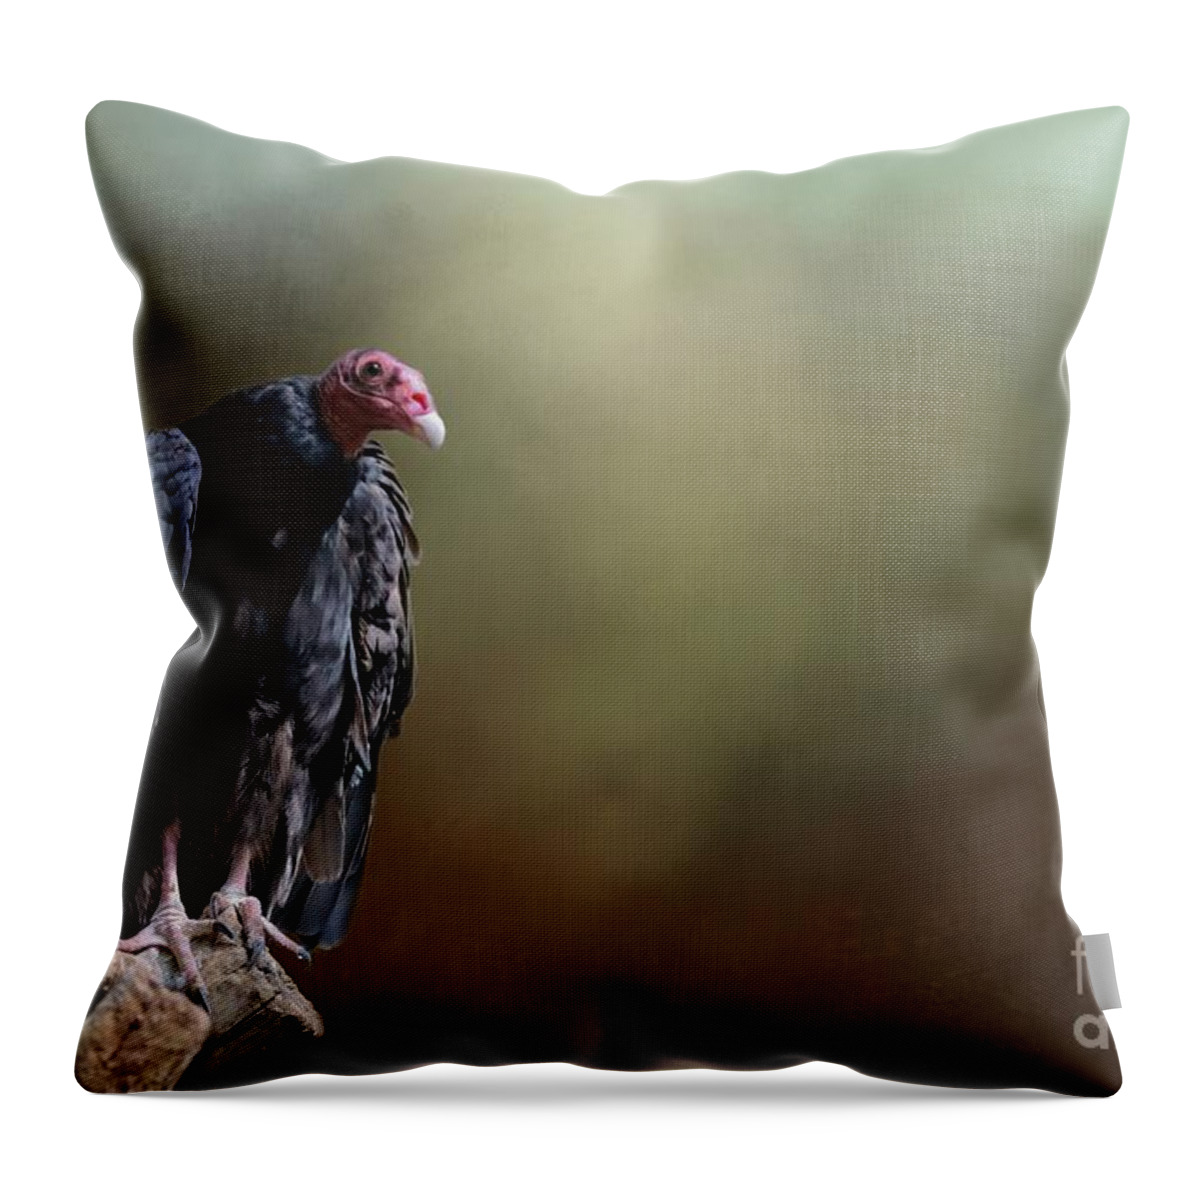 Turkey Vulture Throw Pillow featuring the photograph Turkey Vulture by Eva Lechner